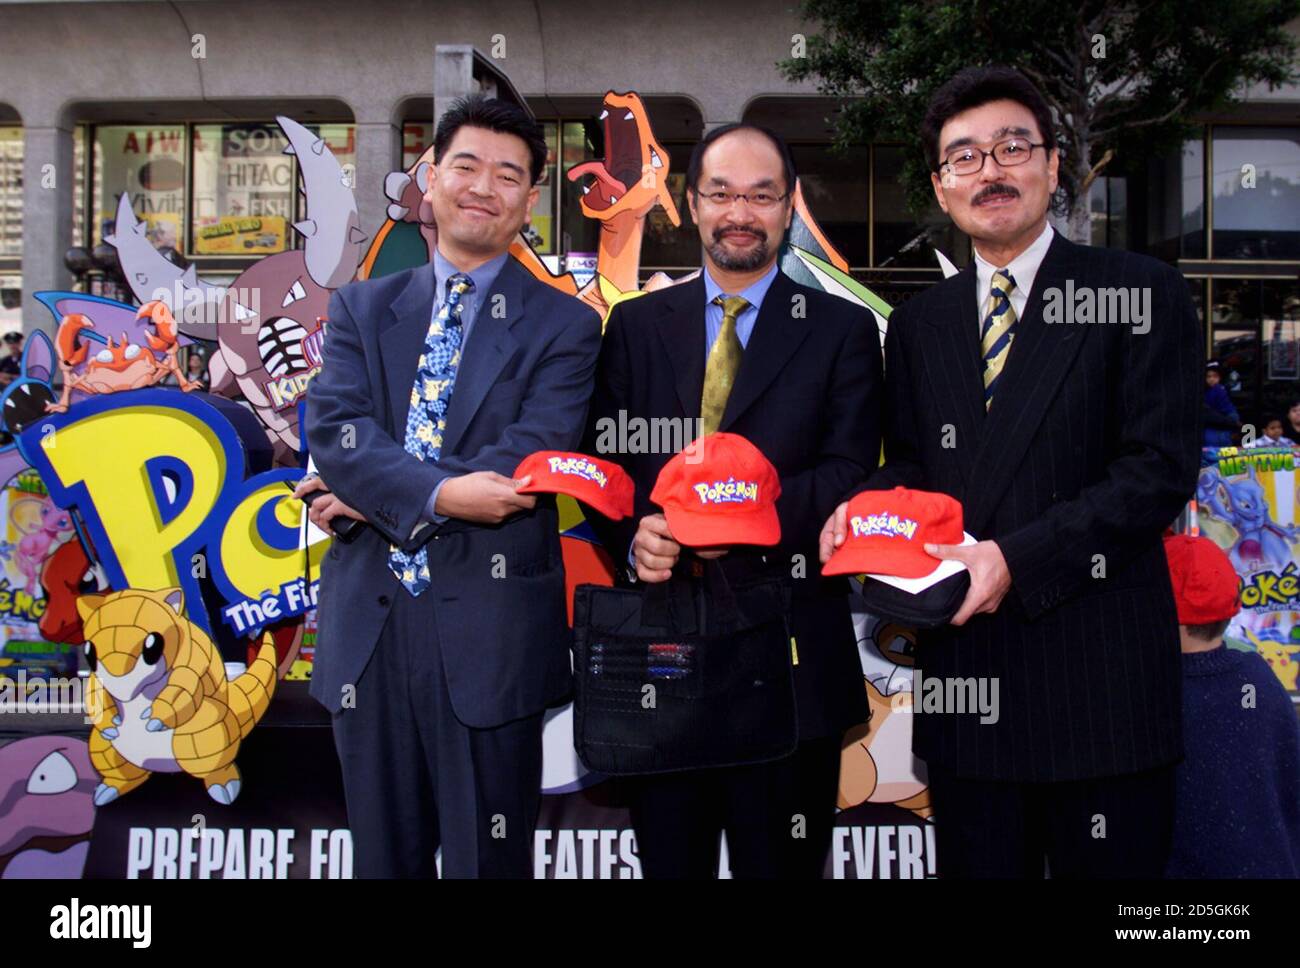 Producers of the animated film ' Pokemon The First Movie' pose together at the film's premiere November 6, at Mann's Chinese Theatre in Hollywood. From the left are: Takemoto Mori, producer, Masakazu Kubo, executive producer, and Toshiaki Okuno, animation producer. The animated adventure is based on the hit Japanese television series and video game.  RMP Stock Photo